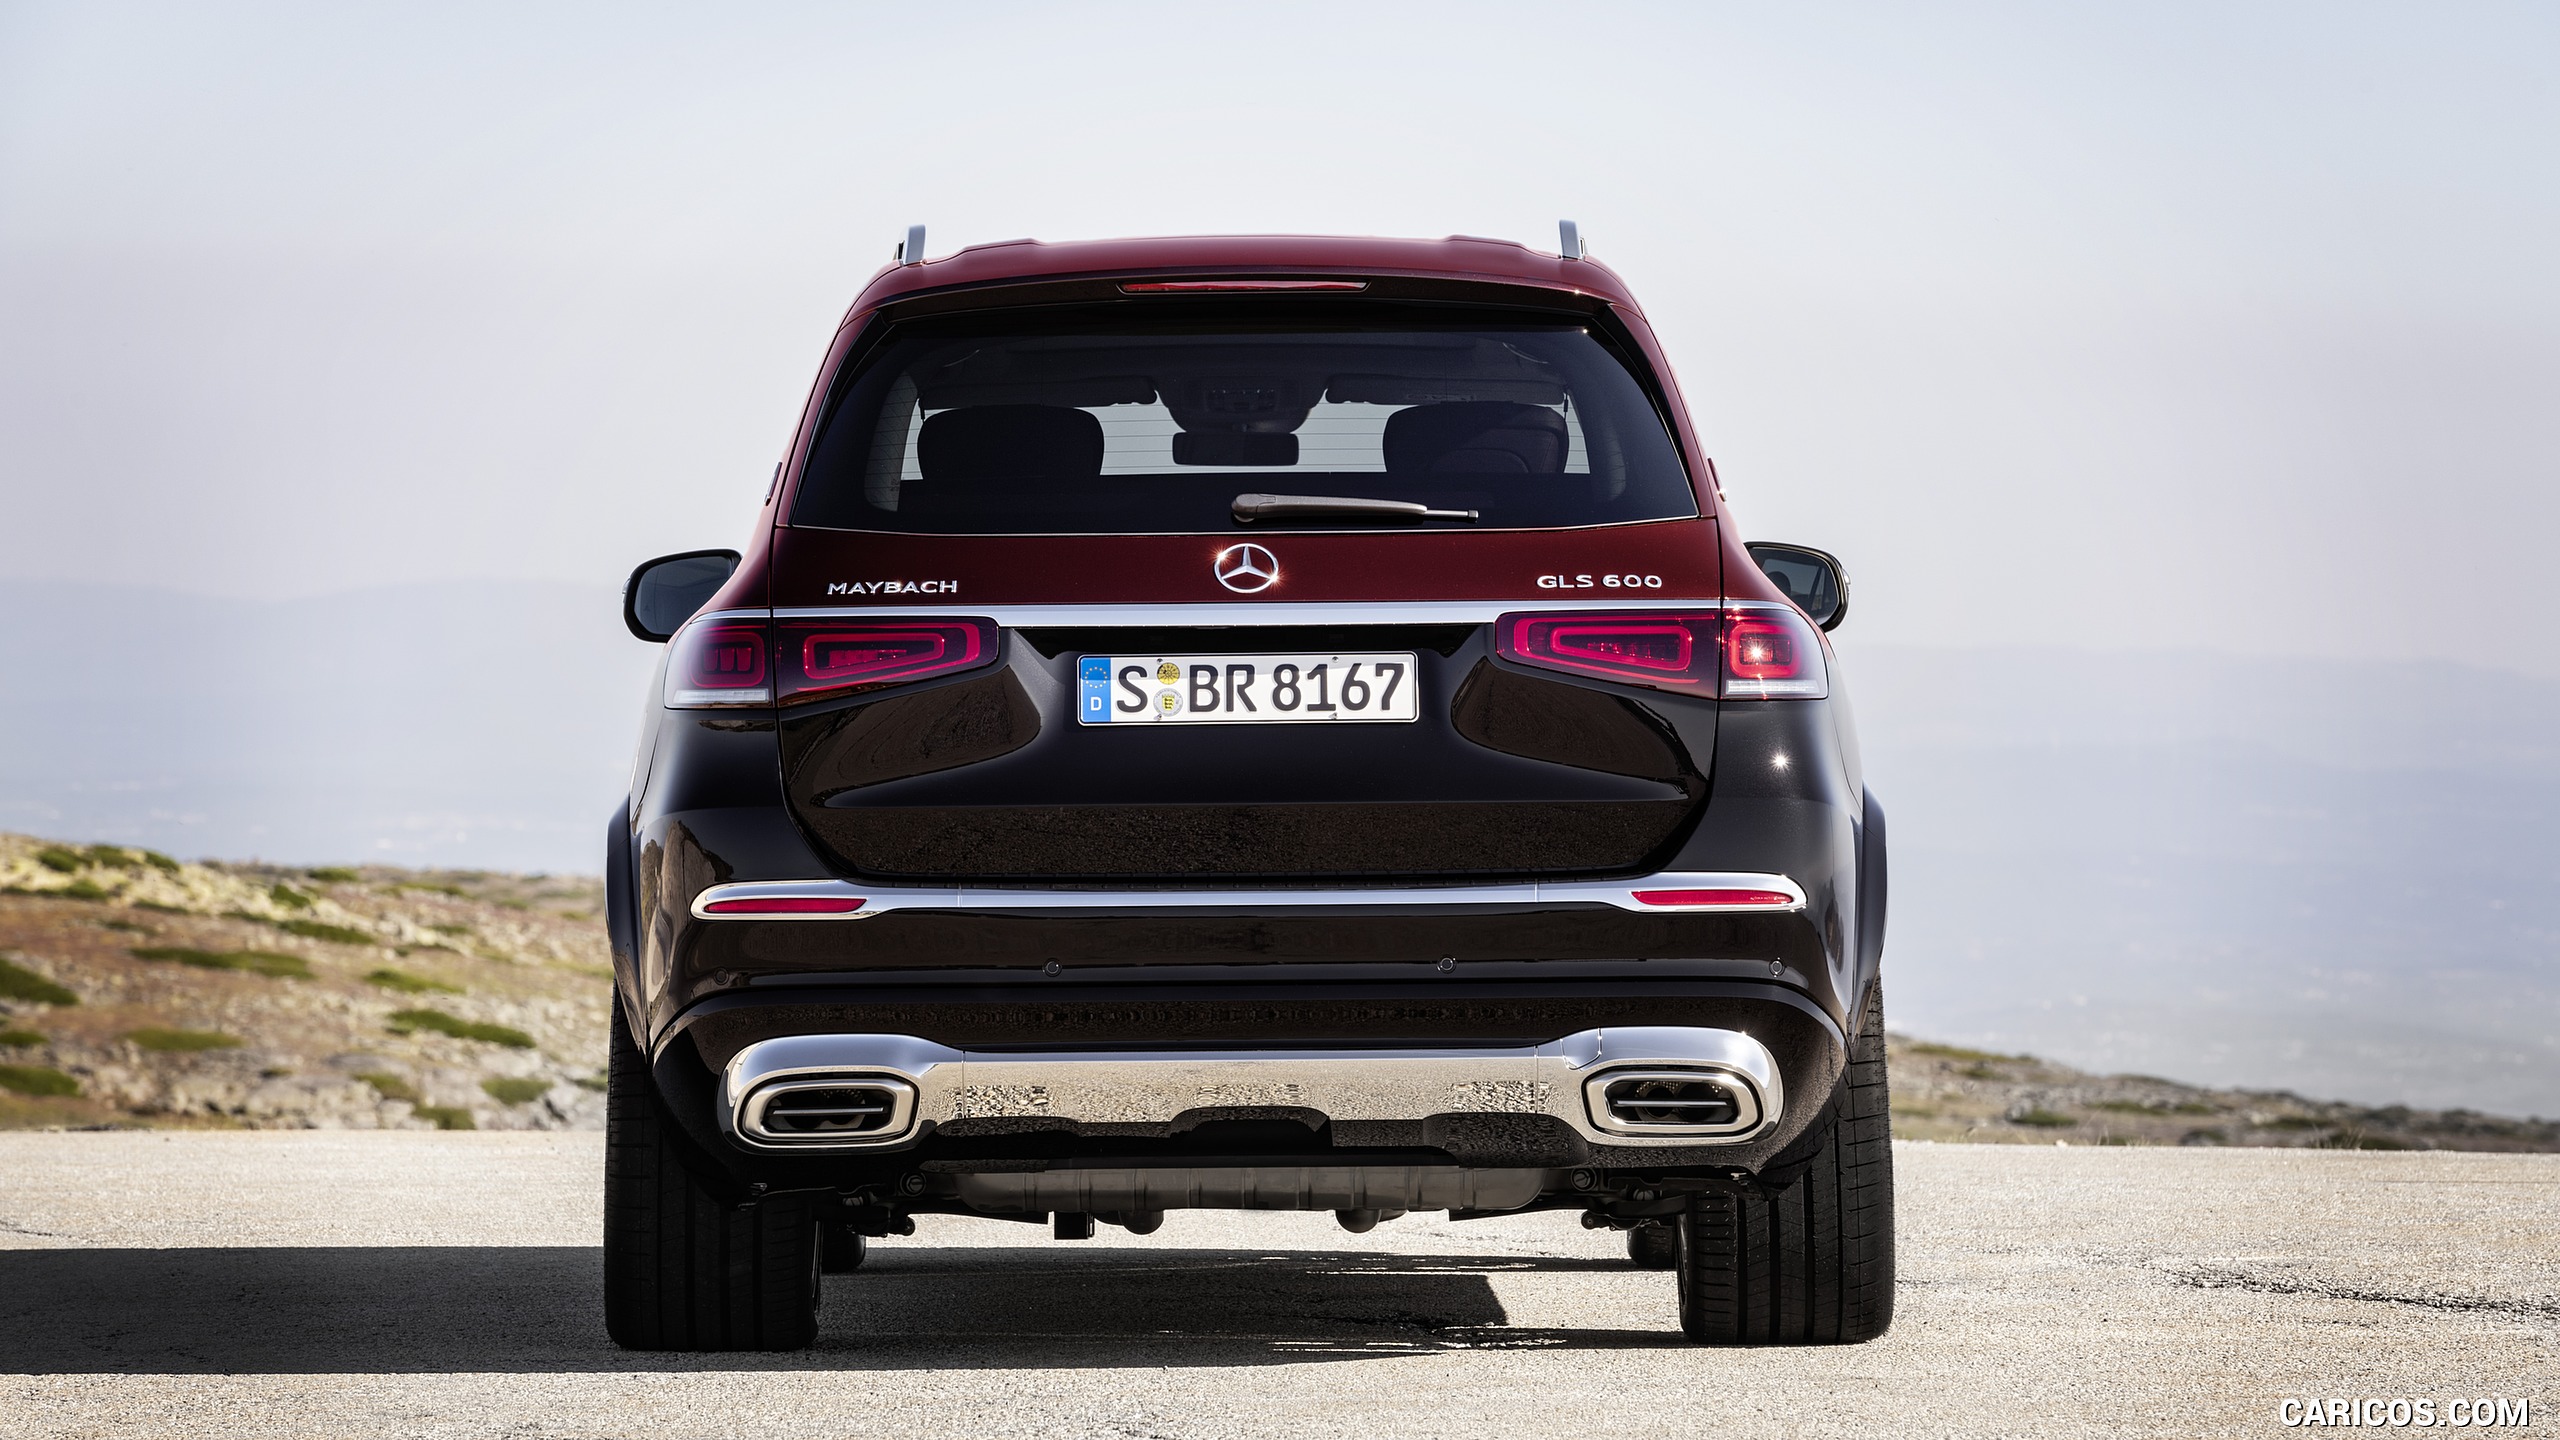 2021 Mercedes-Maybach GLS 600 (Color: Rubellite Red / Obsidian Black) - Rear, #17 of 297